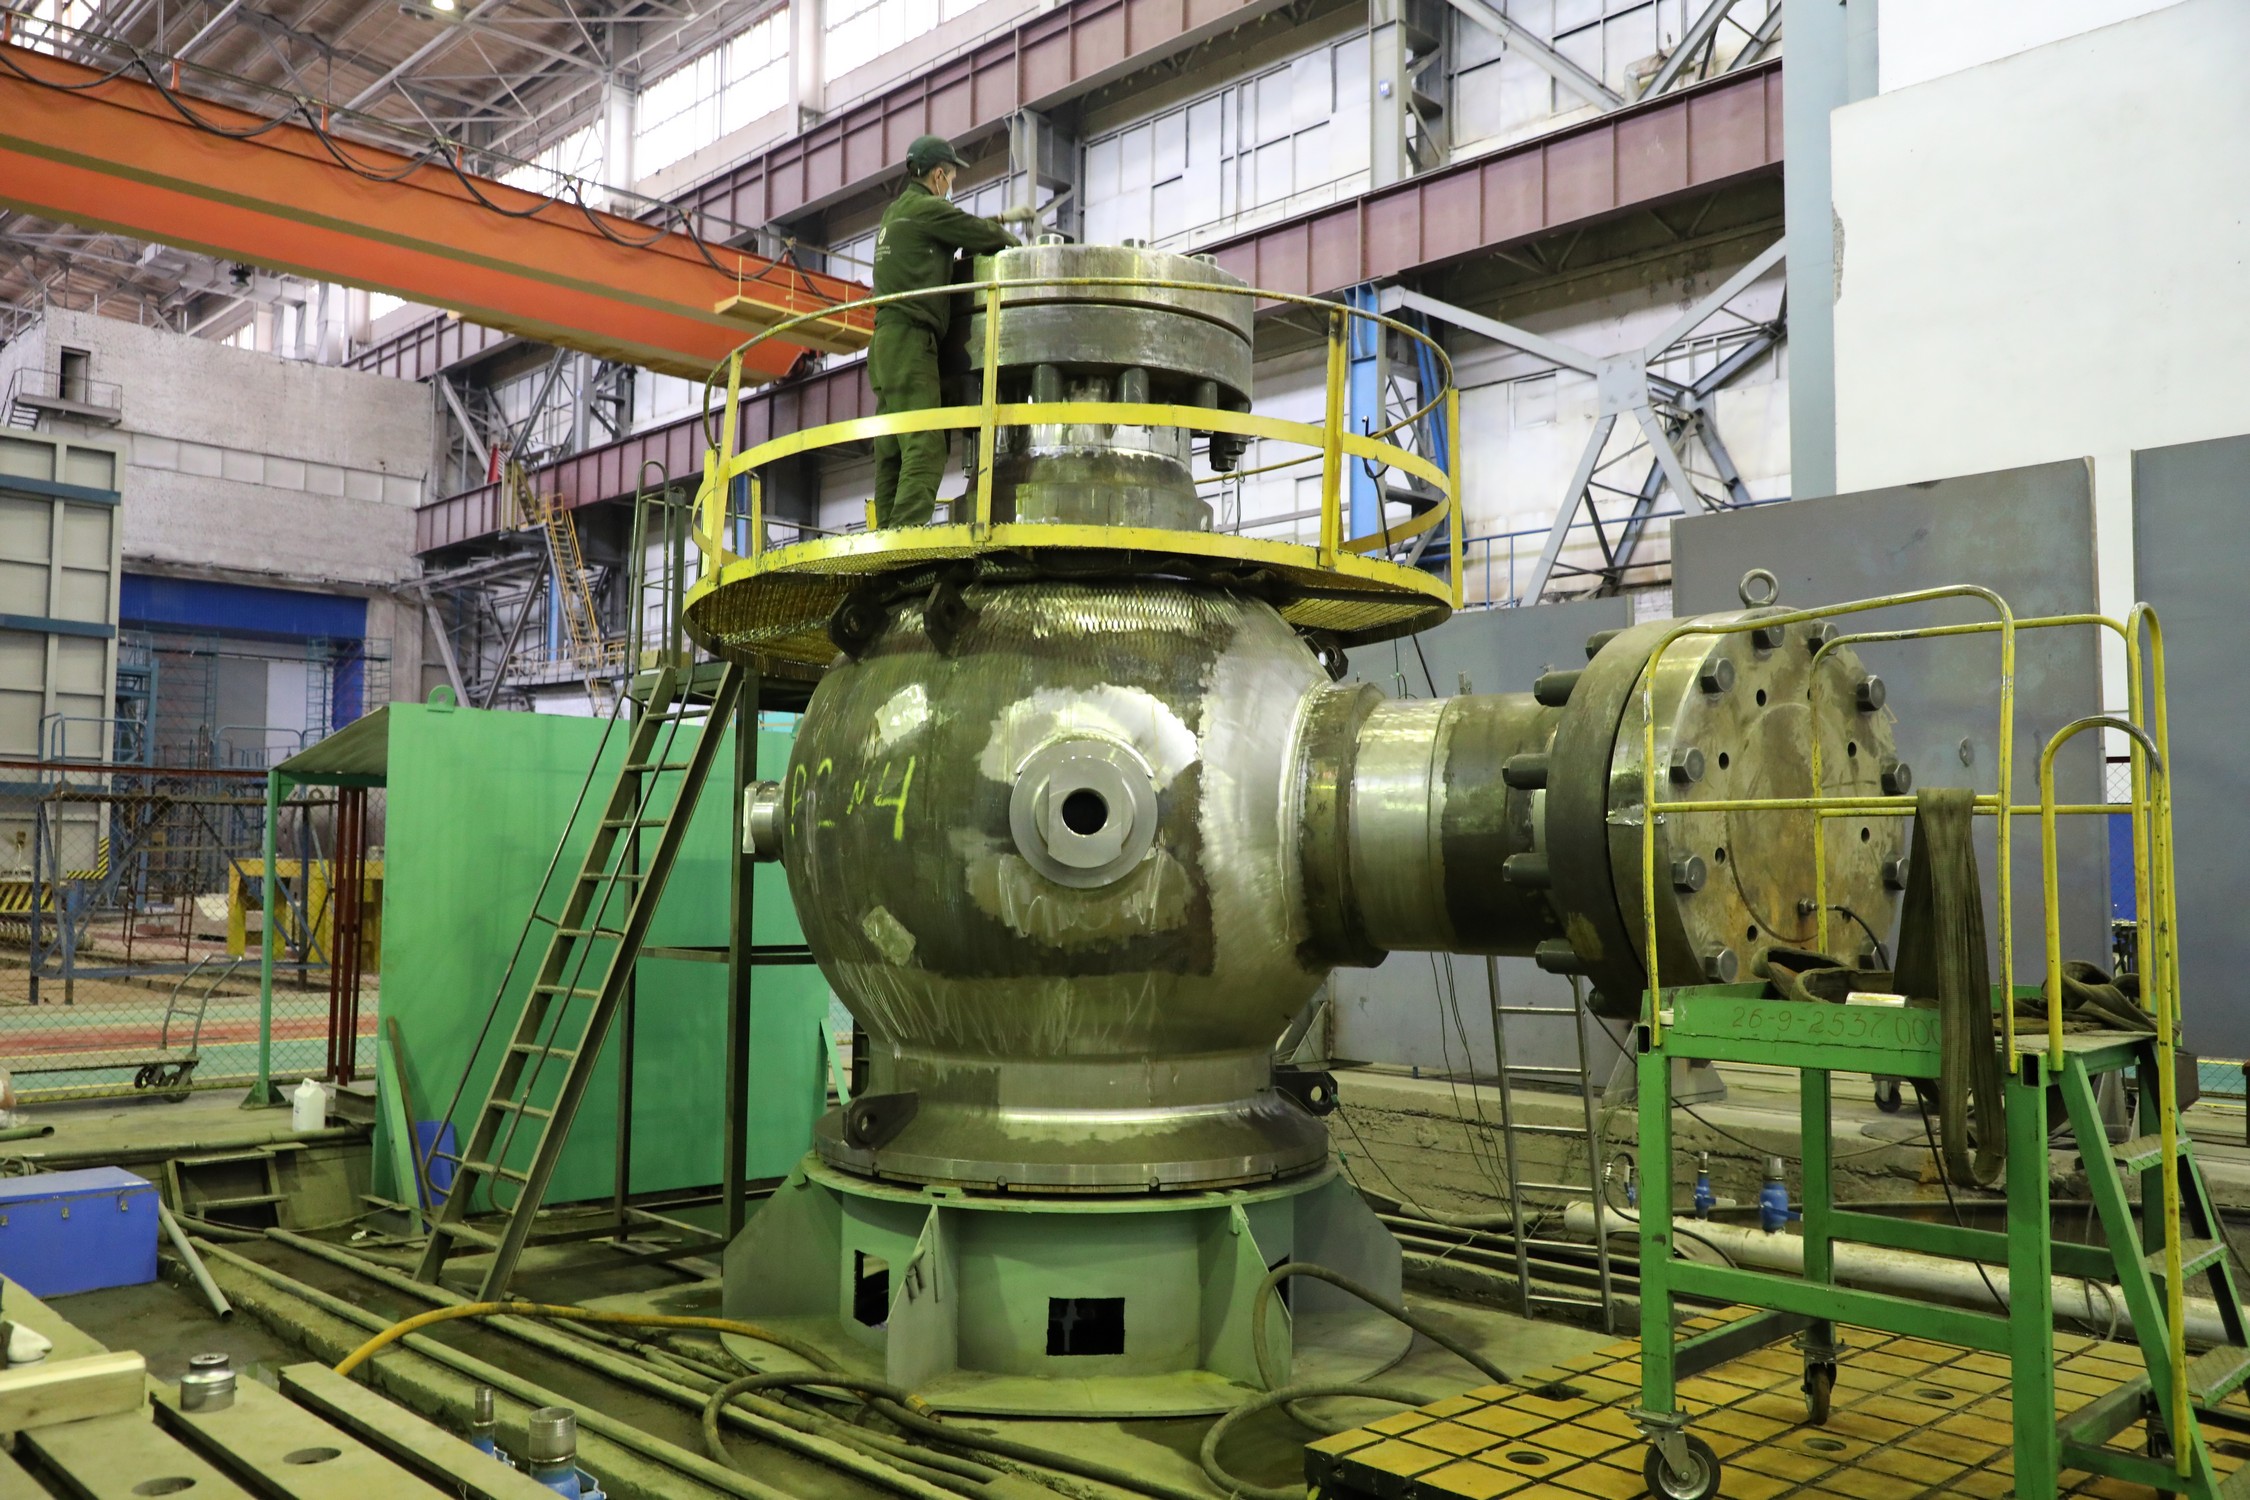 Petrozavodskmash tested an RCPS casing for Rooppur NPP